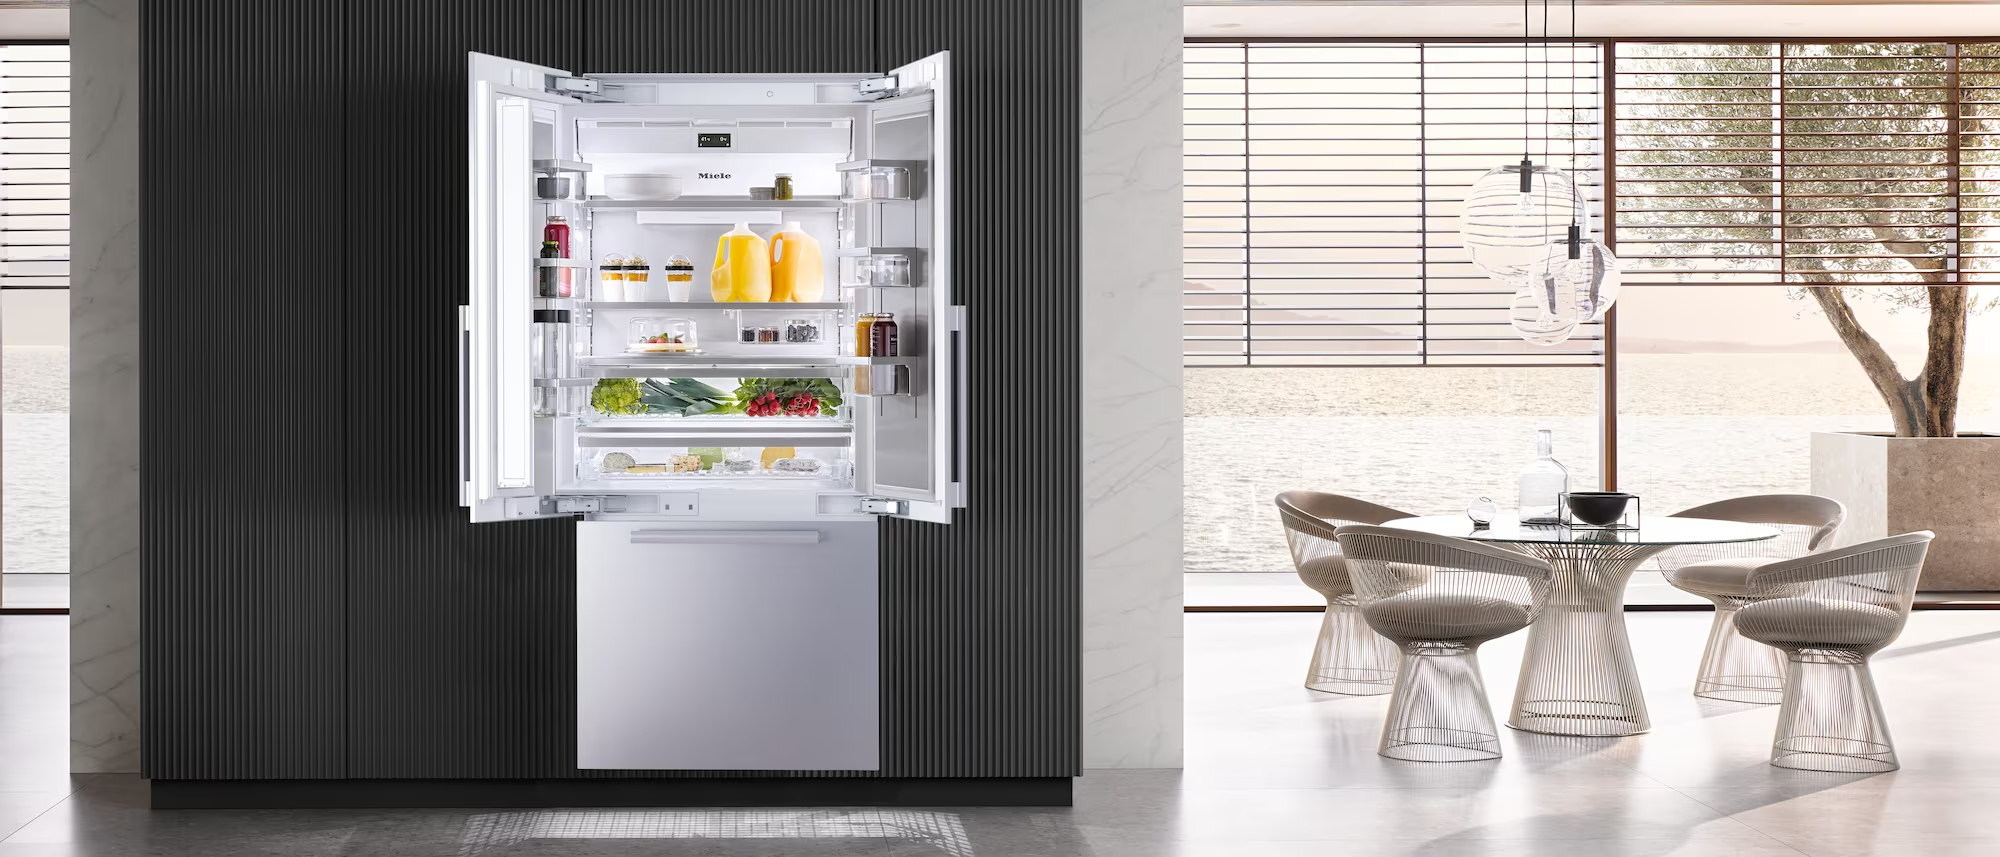 Get to Know Your Fridge: Accessing Miele Refrigerator Manuals缩略图